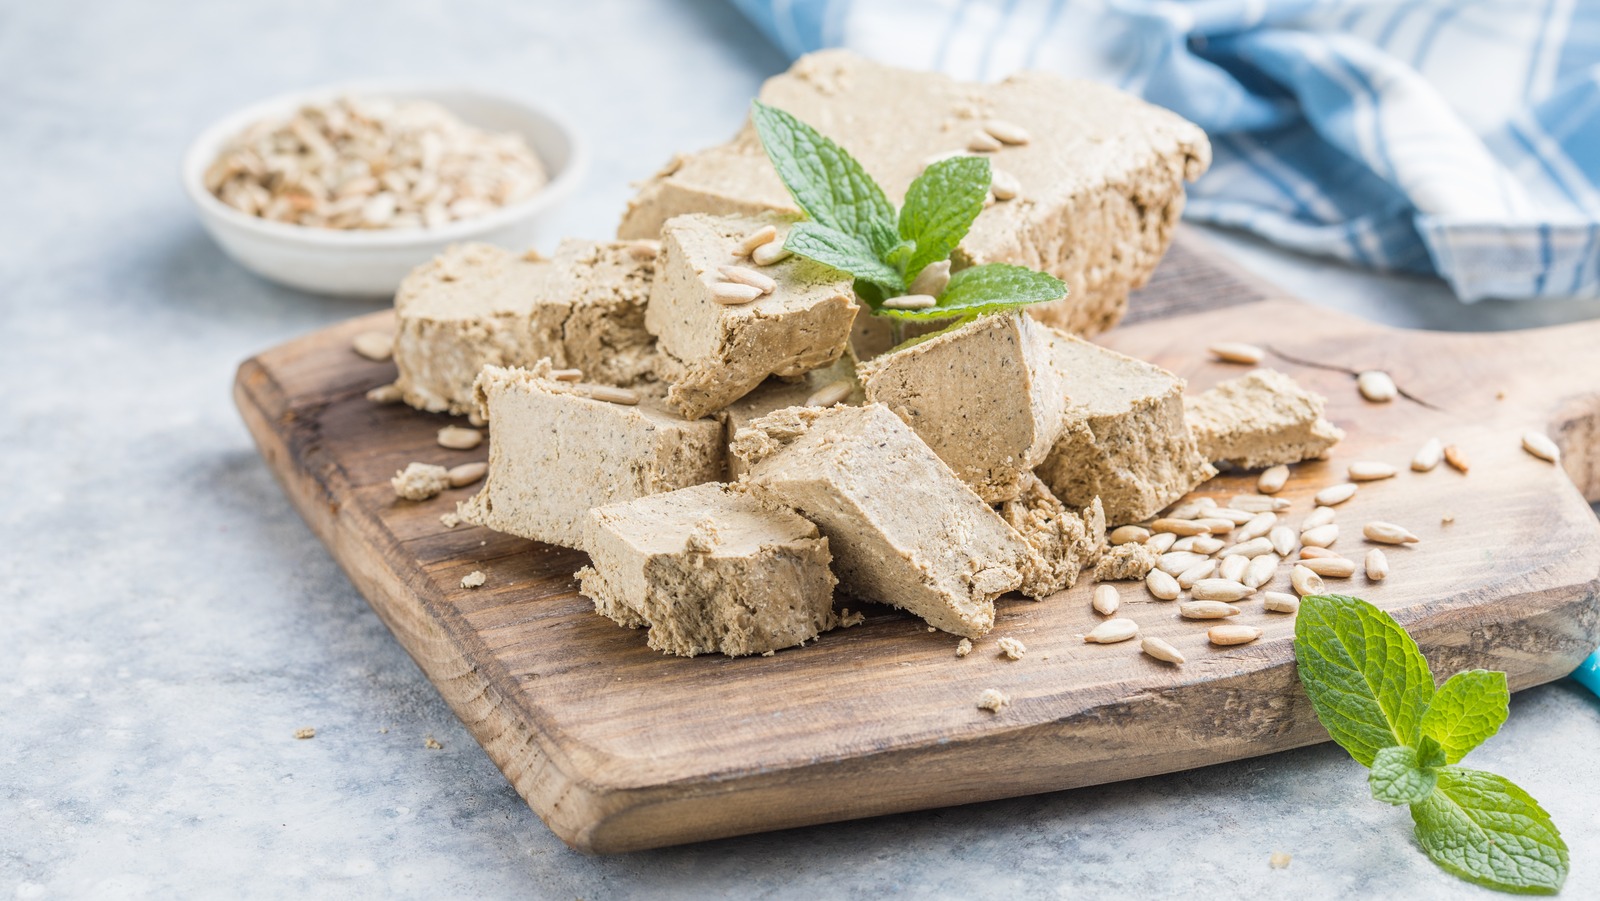 What Is Halva And How Is It Best Used?